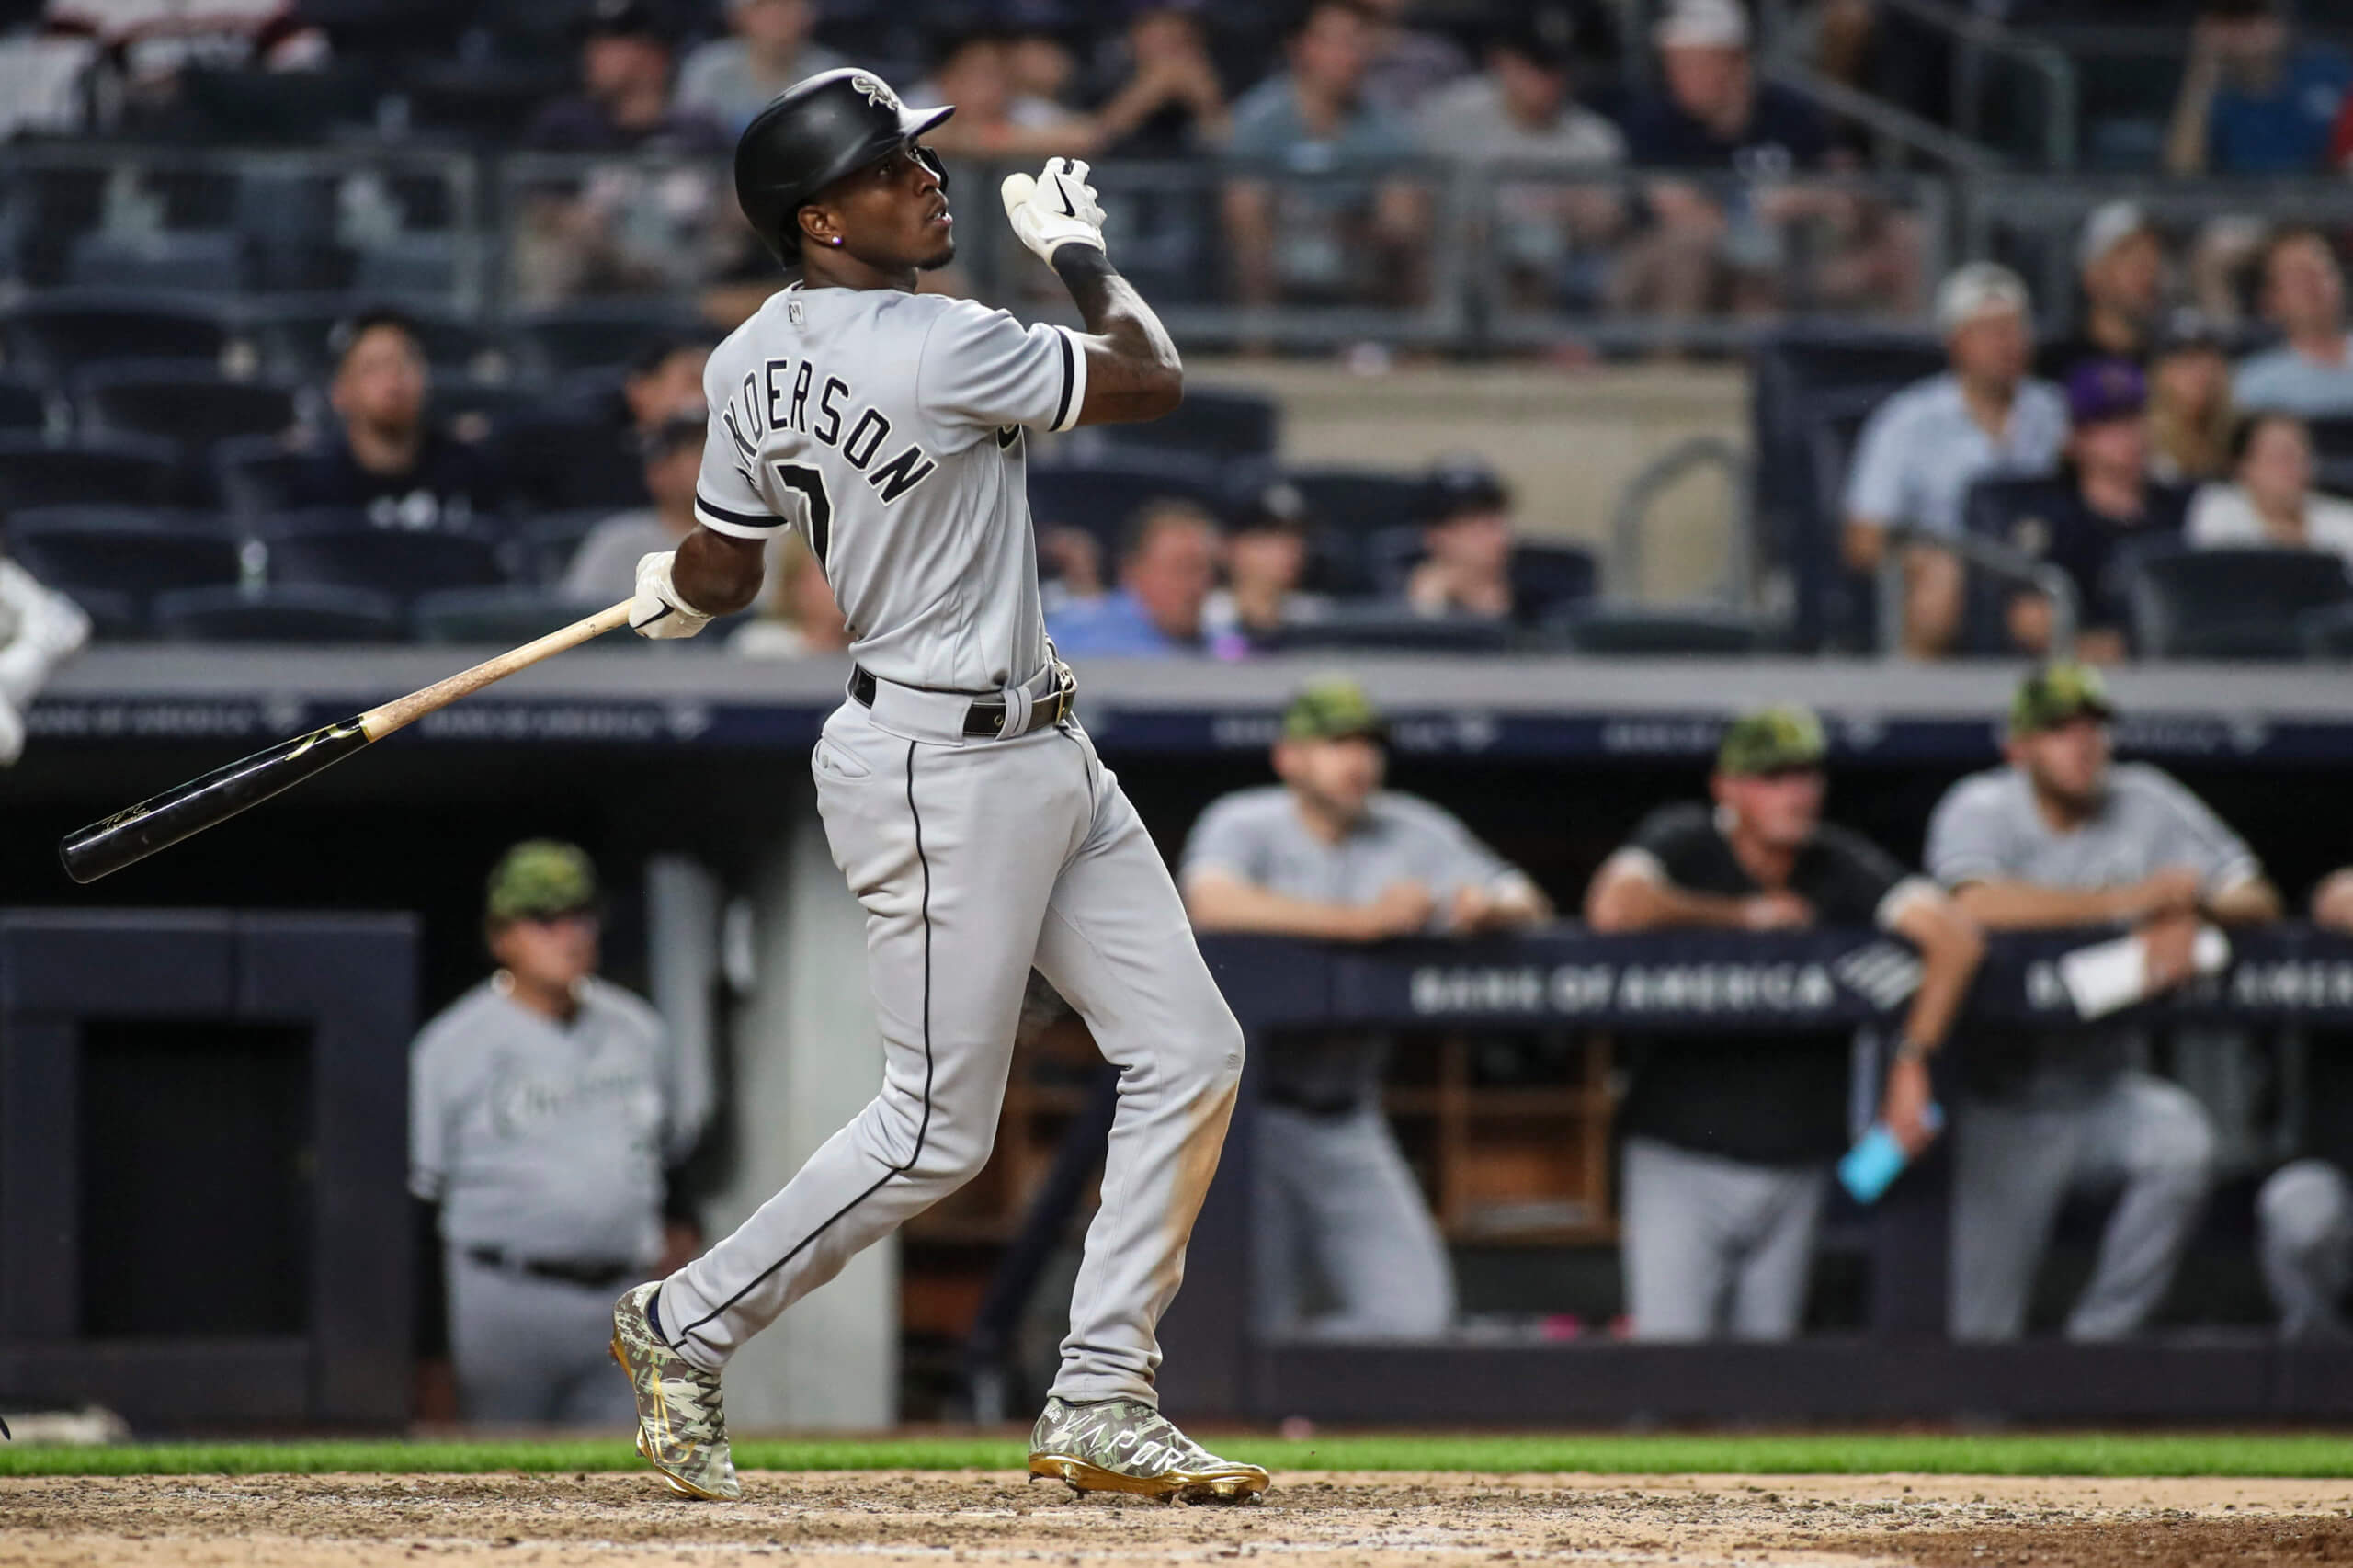 MLB was never going to get a Tim Anderson suspension right